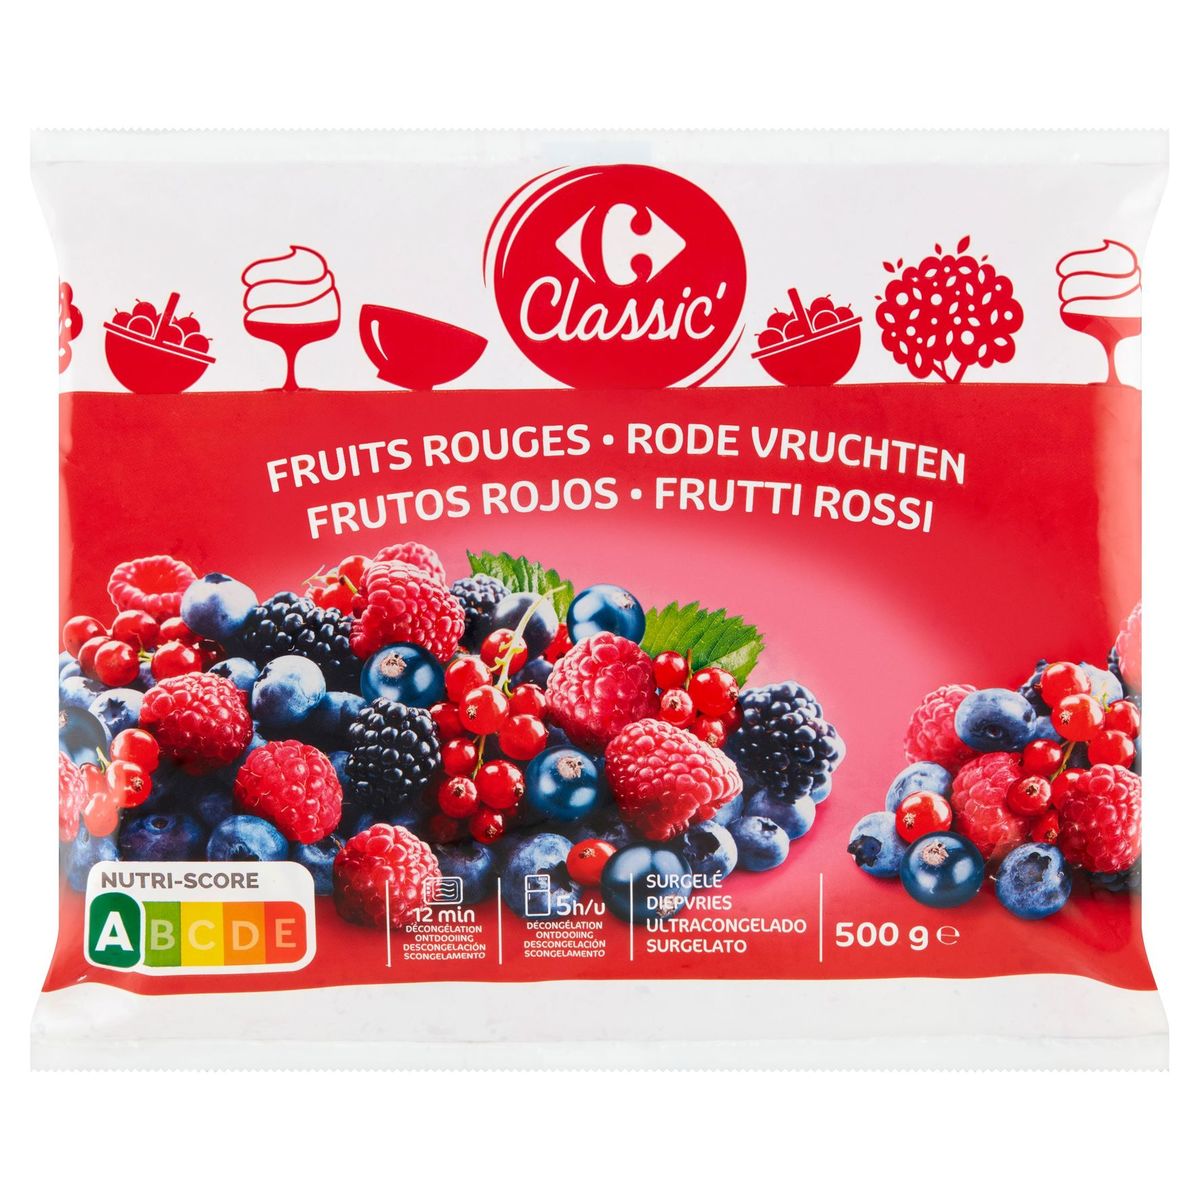 Carrefour Classic' Fruits Rouges 500 g